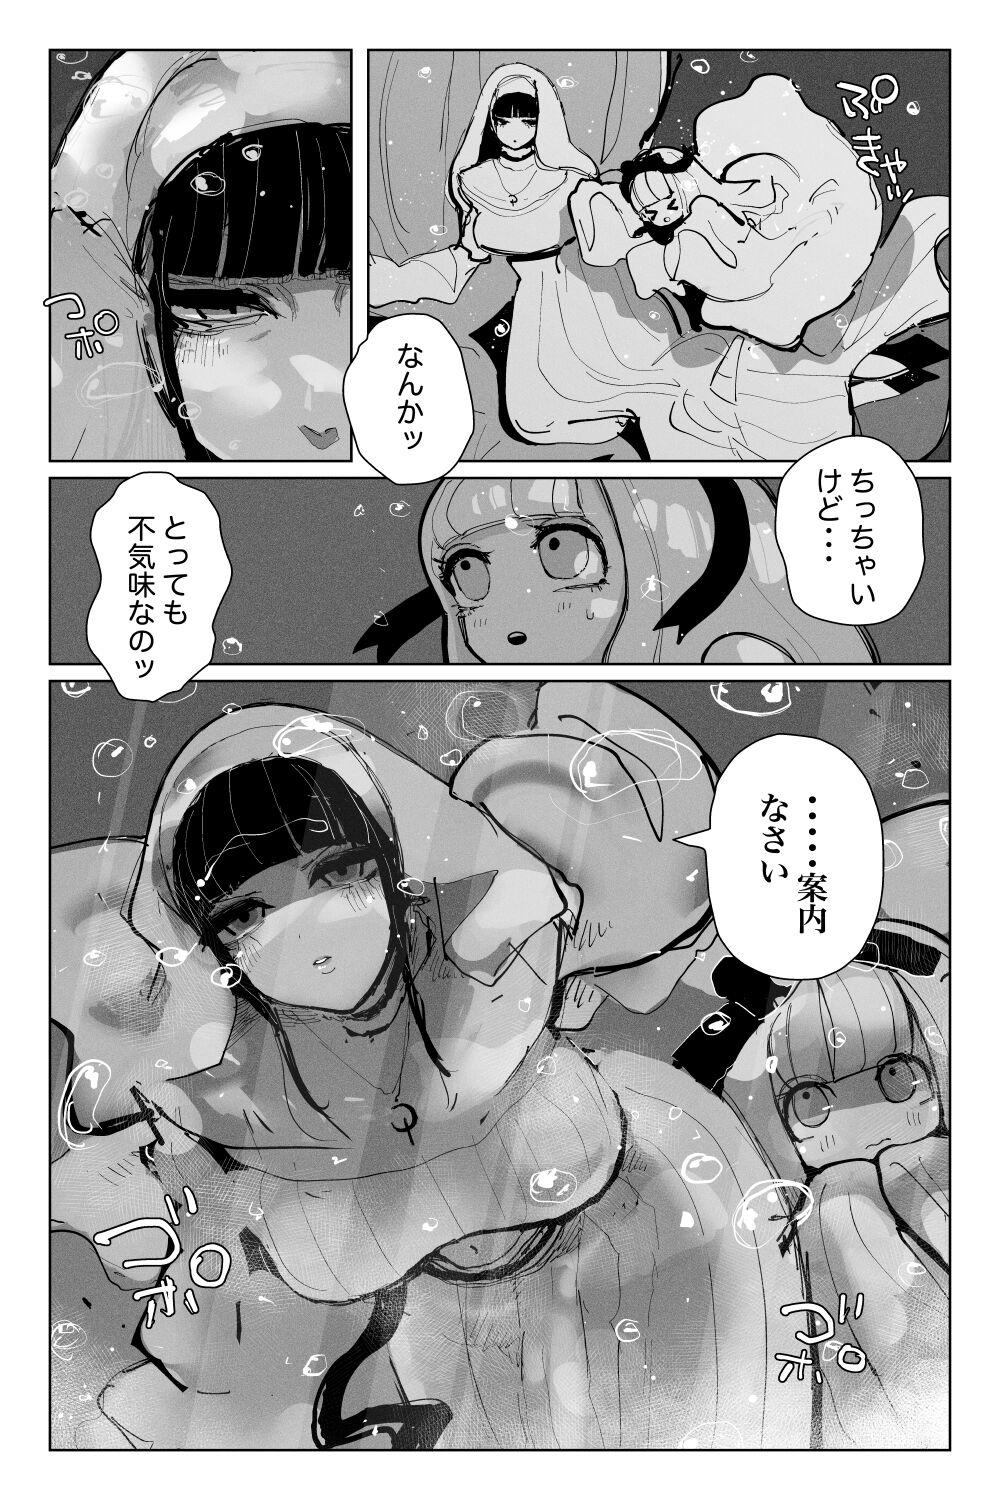 Coroa #03MarineMirage + Bad end... - Original Married - Page 5